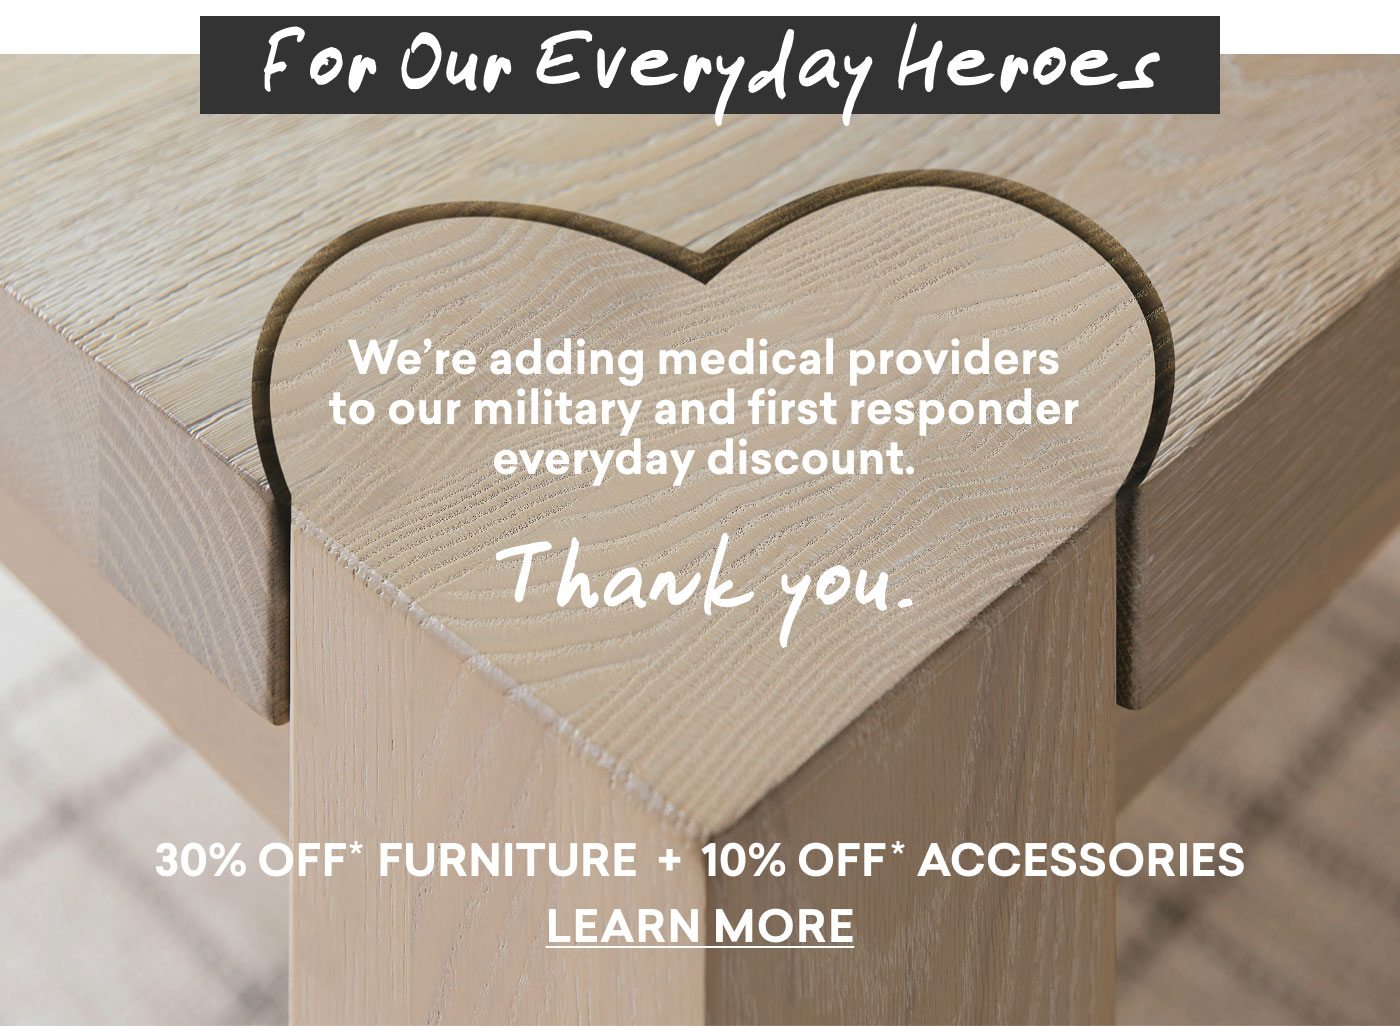 For our everyday heroes. Military, first responder & medical provider discount, 30% off furniture + 10% off accessories. Learn more.